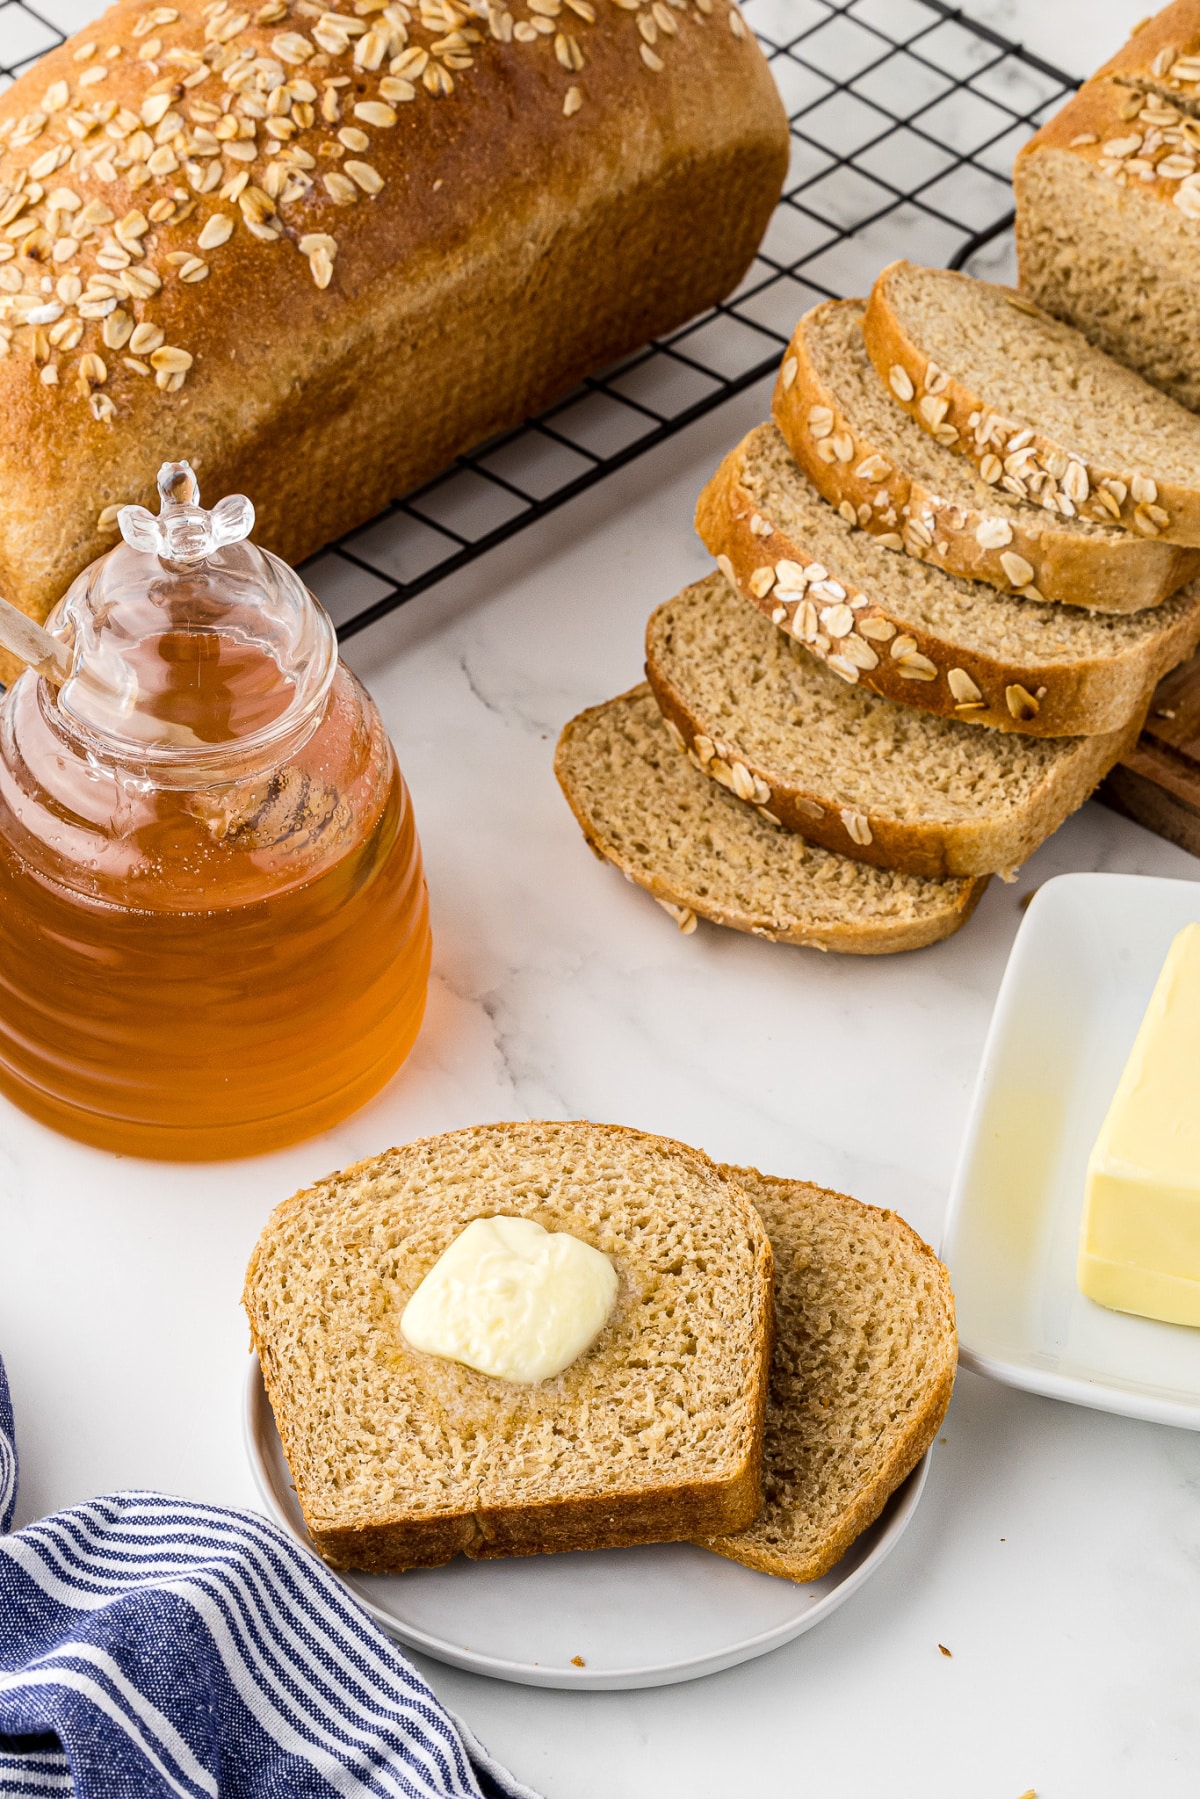 Two slices of bread on a plate with butter on top and a jar of honey and loaf of bread in the background